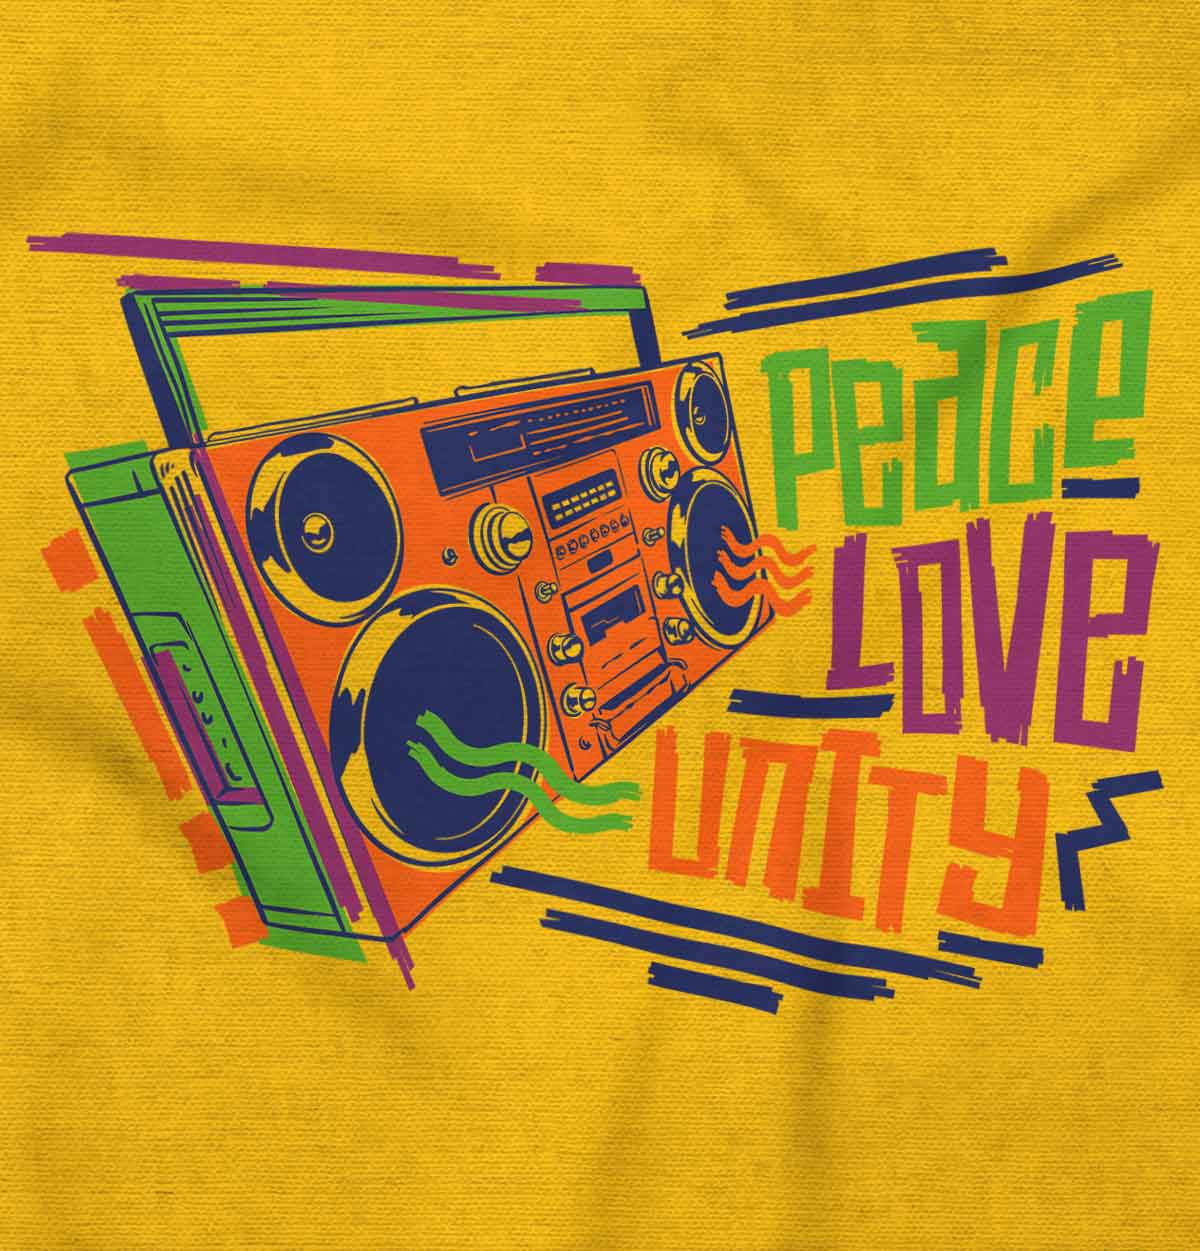 This artwork is a graffiti-style design with a boombox, symbolizing unity, peace, and love, bringing people together through music and reminding us of the power of positivity.